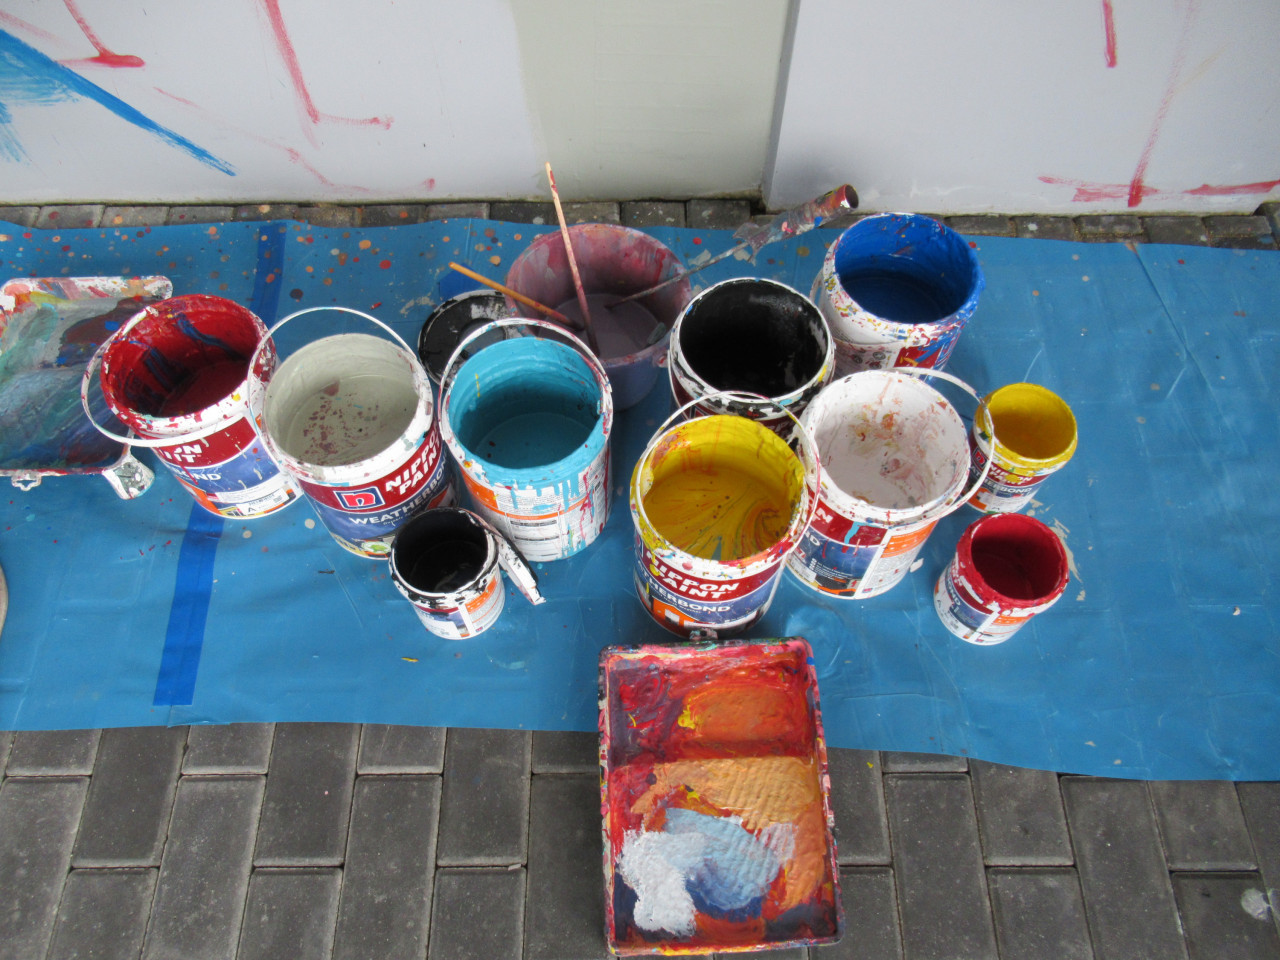 The paints used by Leonard Siaw. – Pic courtesy of Marc de Faoite